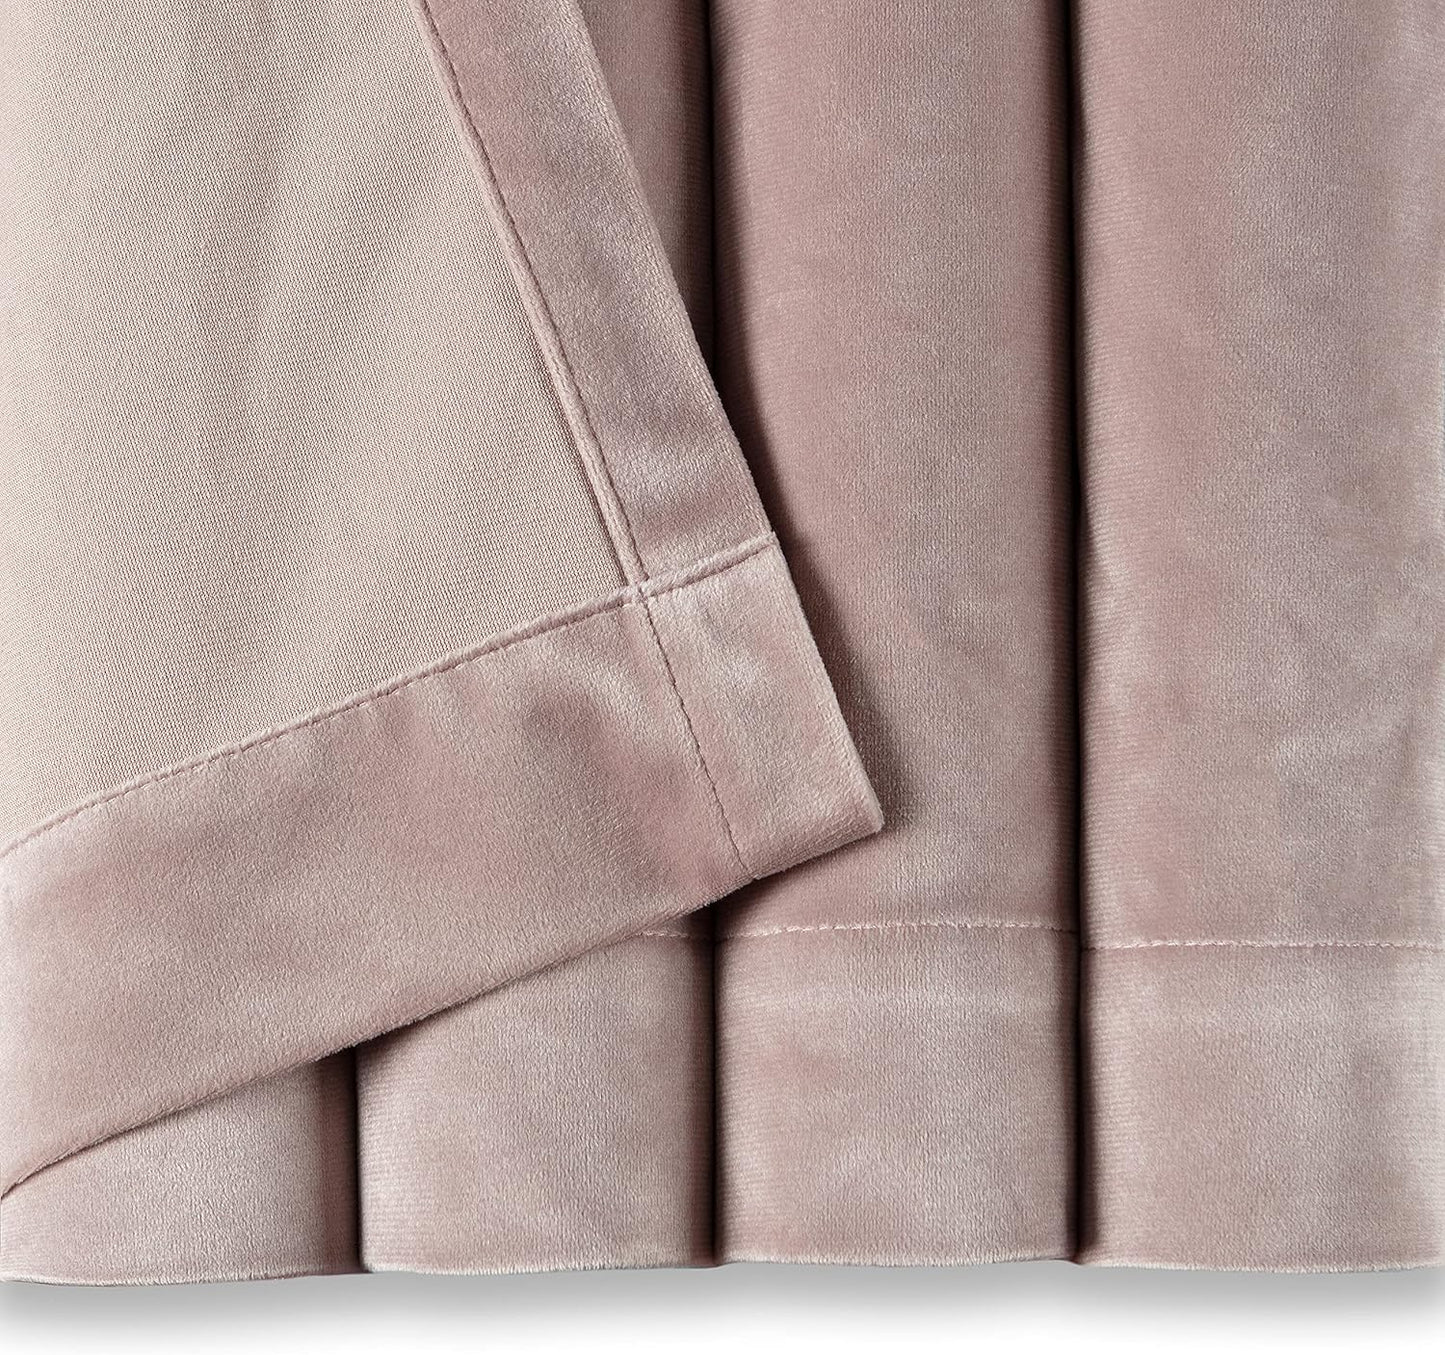 Chanasya Premium Solid Velvet Curtains - Classy and Solid Drapes for Living Room or Bedroom - 52" X 63" - Blush, 2 Panels  PurchaseCorner   